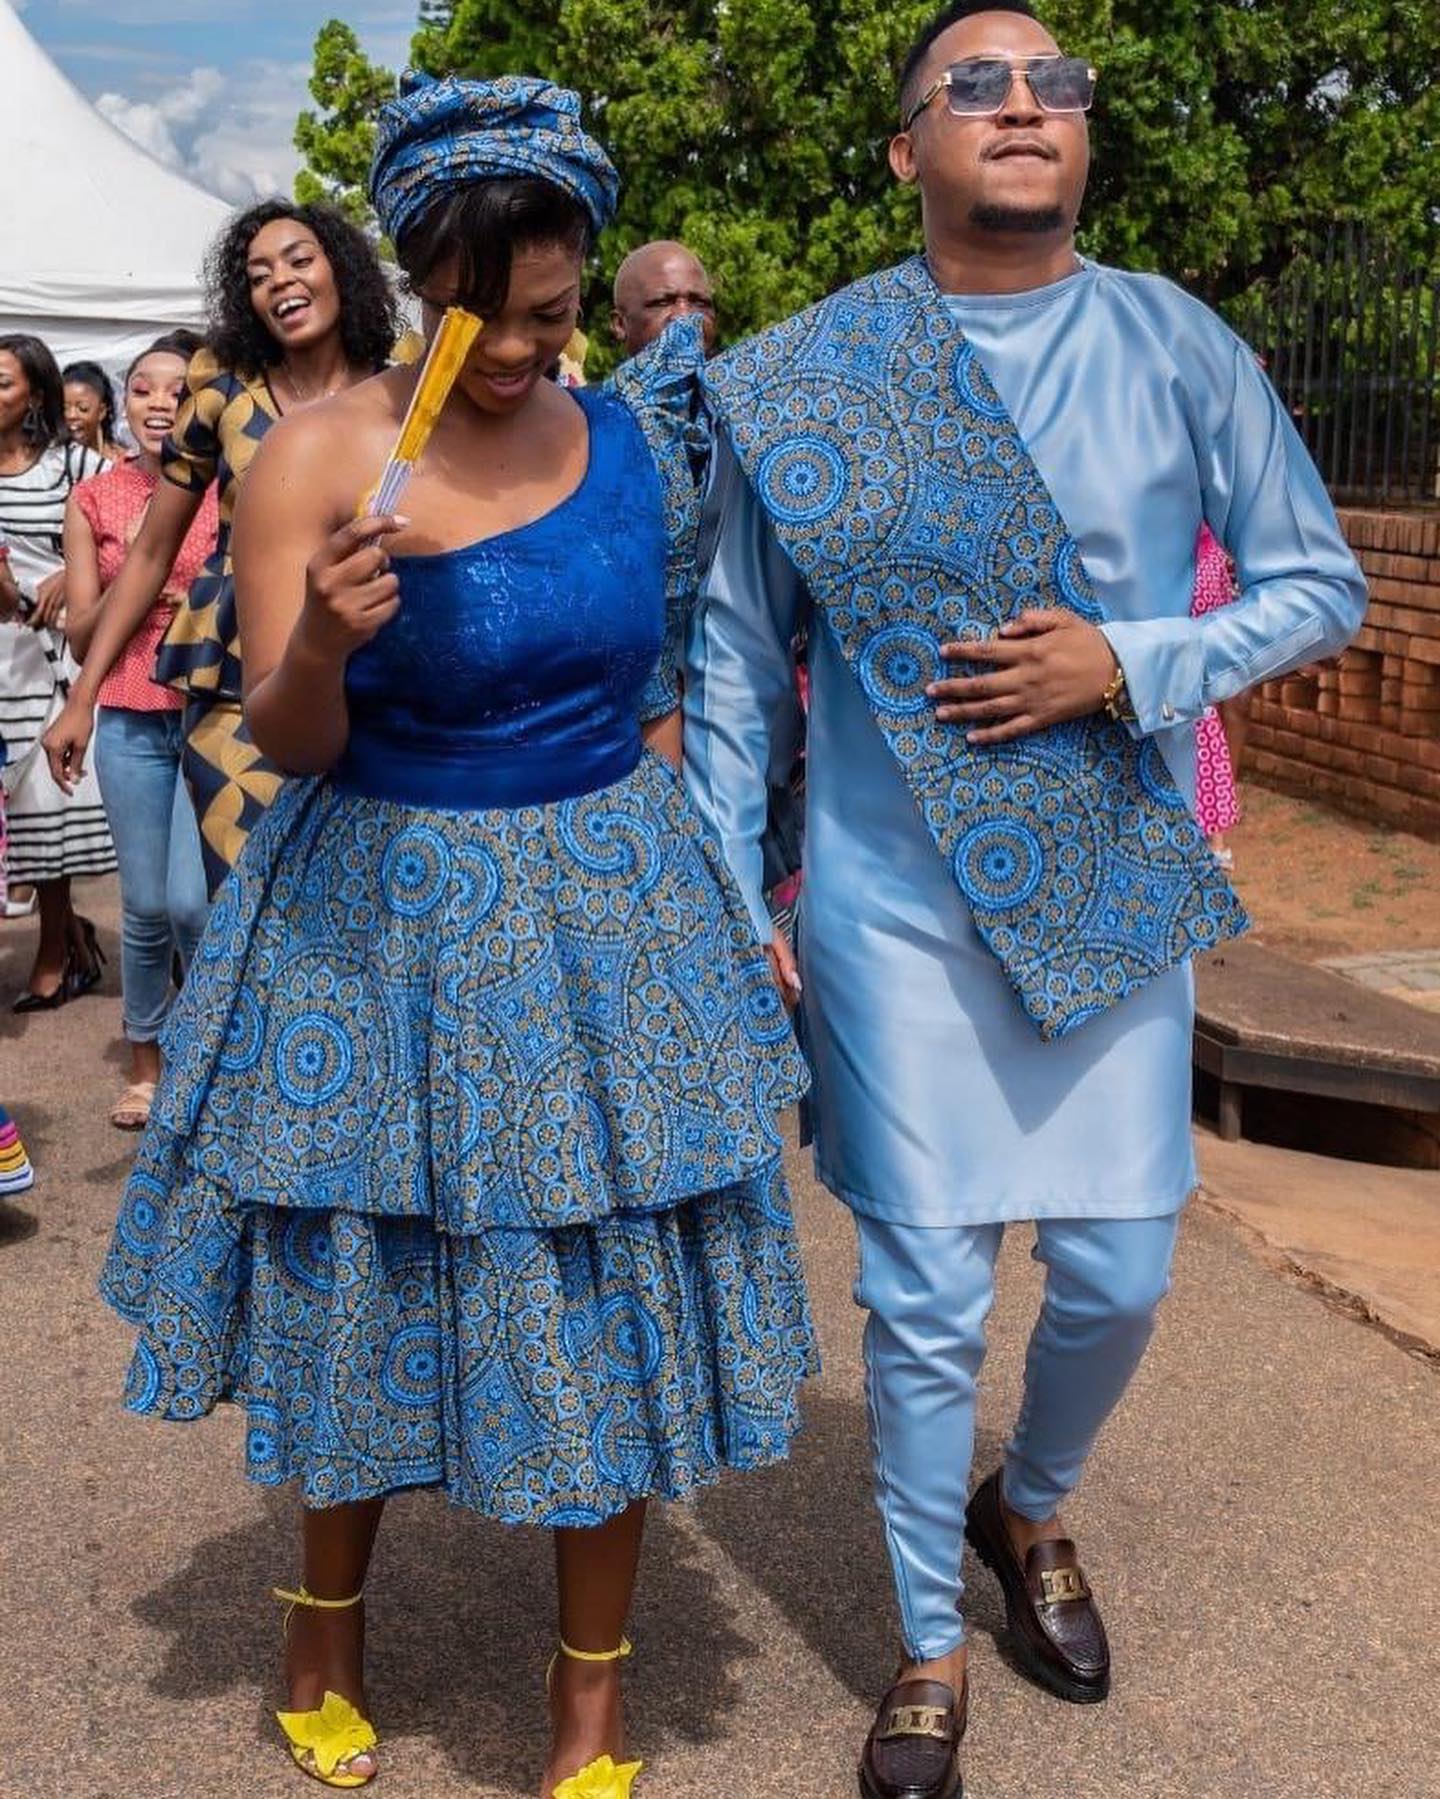 Amazing Tswana Dresses A Fabric Steeped in History and Tradition